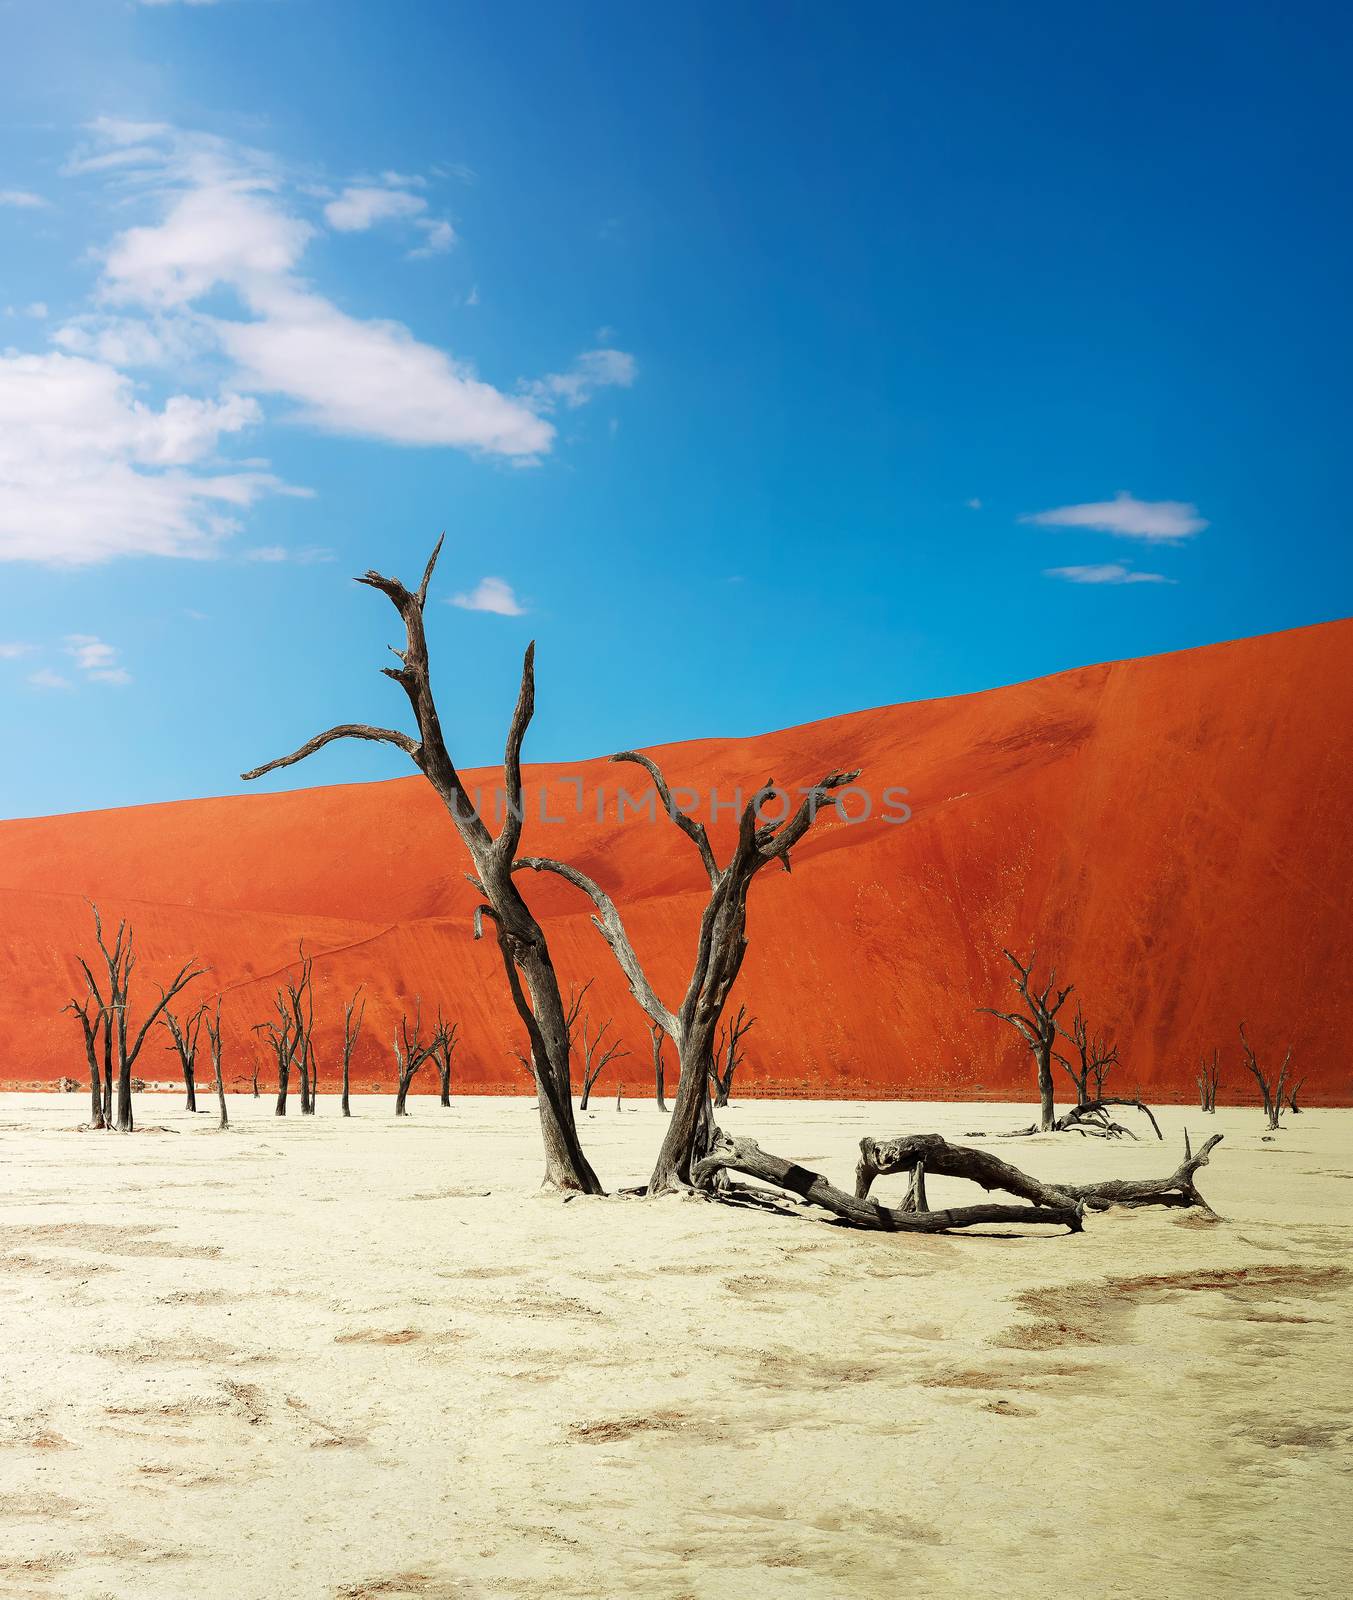 Dead camel thorn trees and the red dunes of Deadvlei in Namibia by nickfox